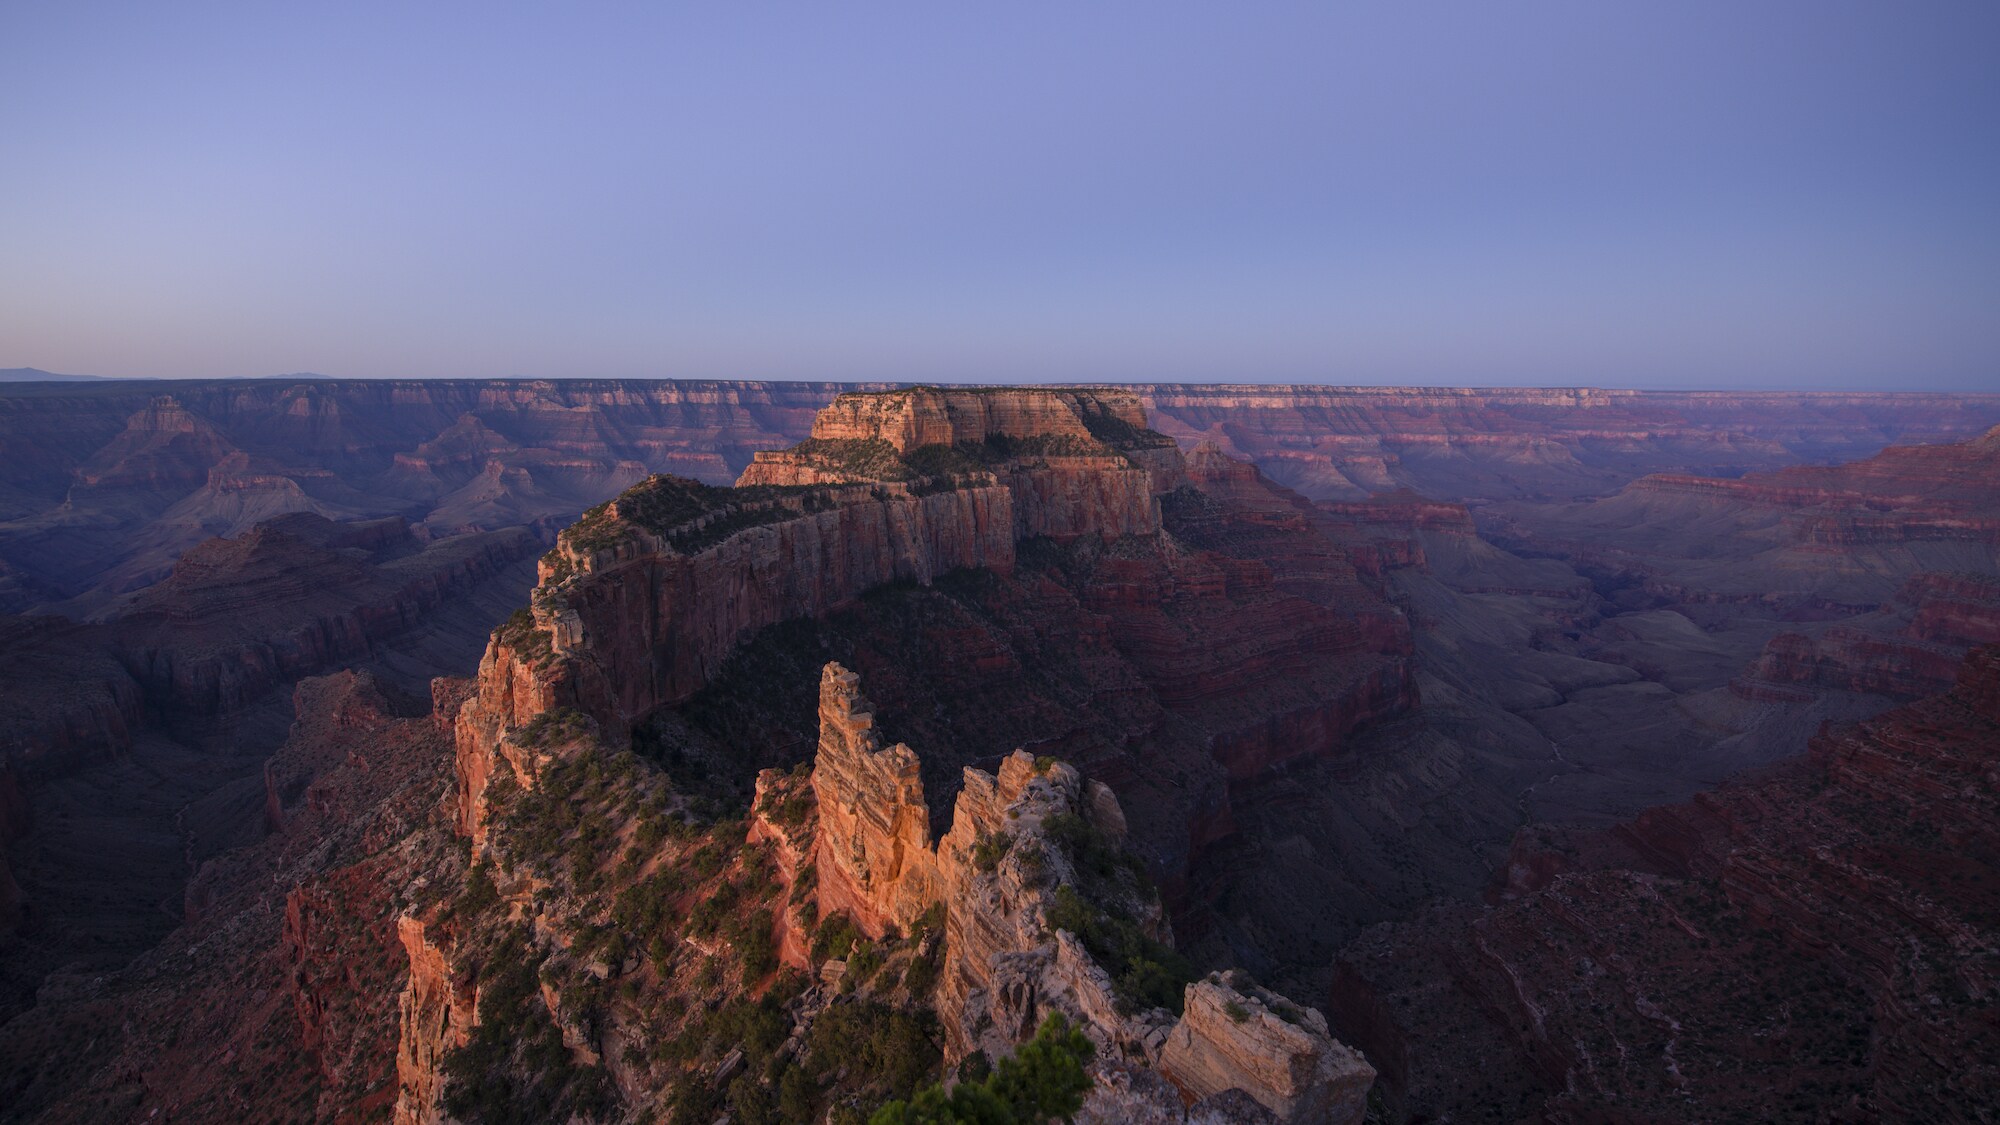 Sun rises over the sheer cliffs and barren rocks of the Grand Canyon, AZ. (National Geographic for Disney+)